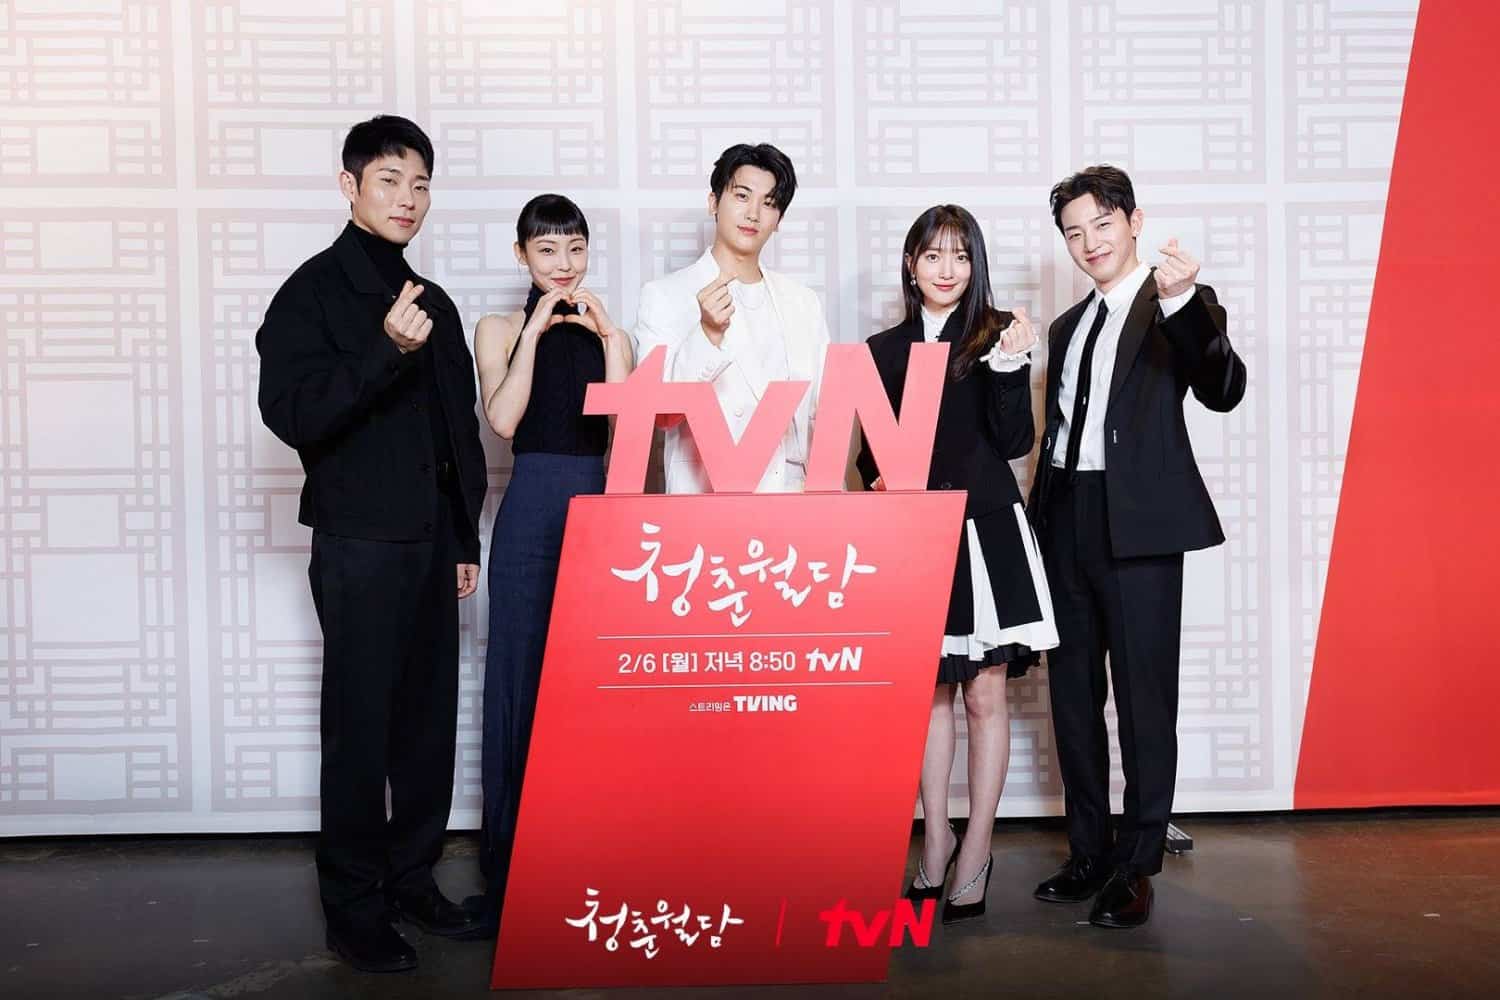 Our Blooming Youth cast (credits:Dramabeans)